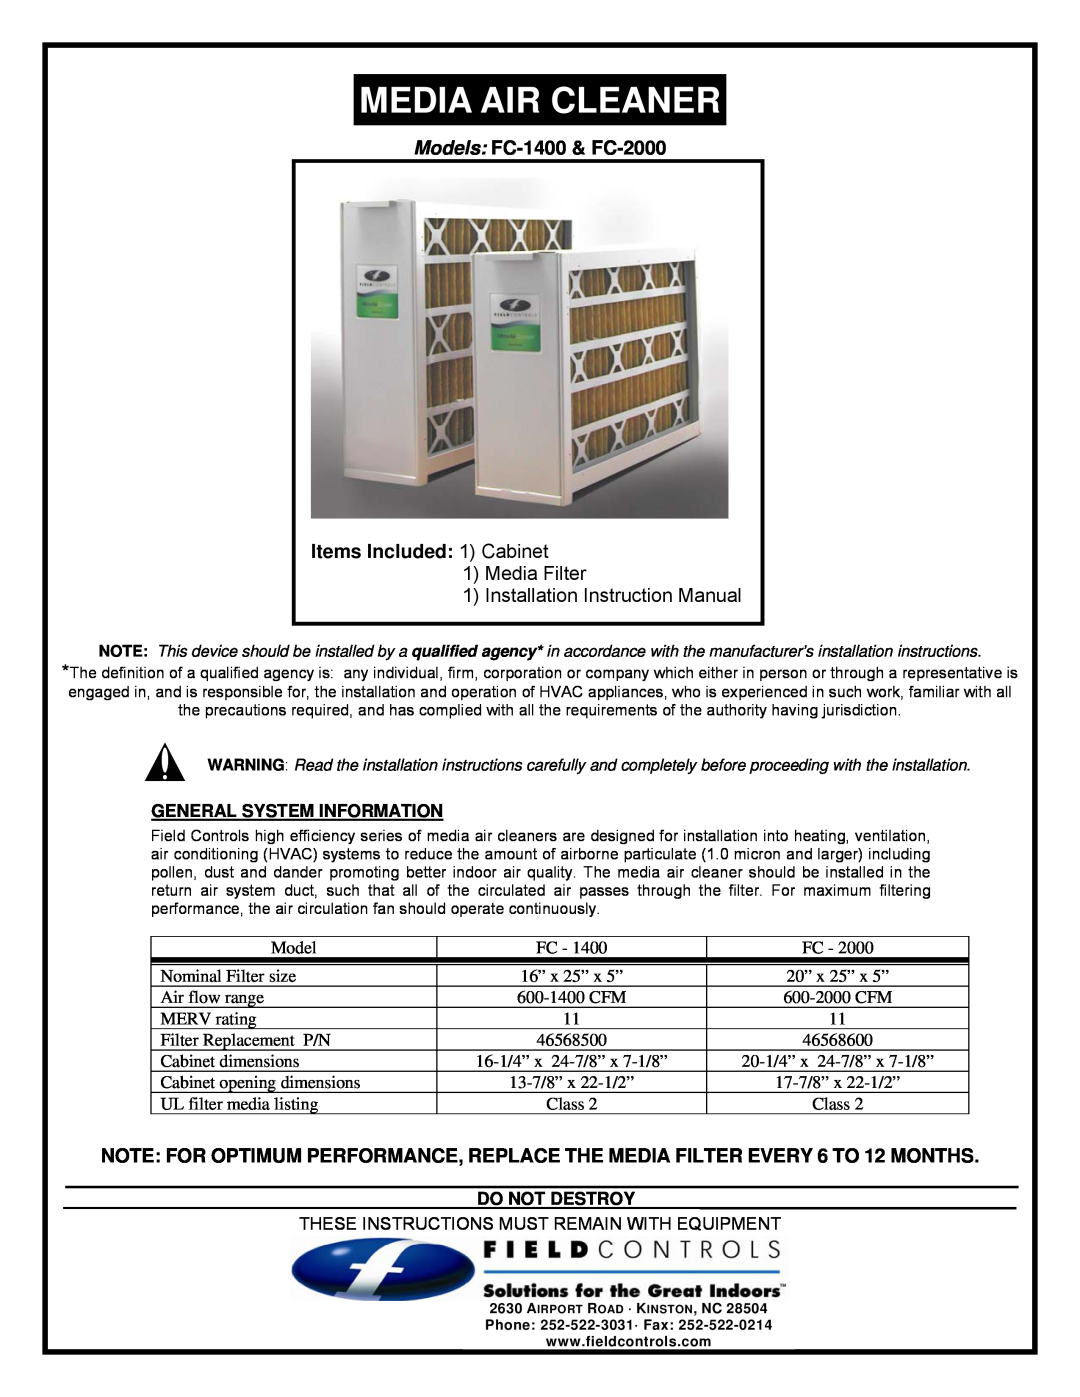 Field Controls FC-2000, FC-1400 installation instructions General System Information, Do Not Destroy, Media Air Cleaner 